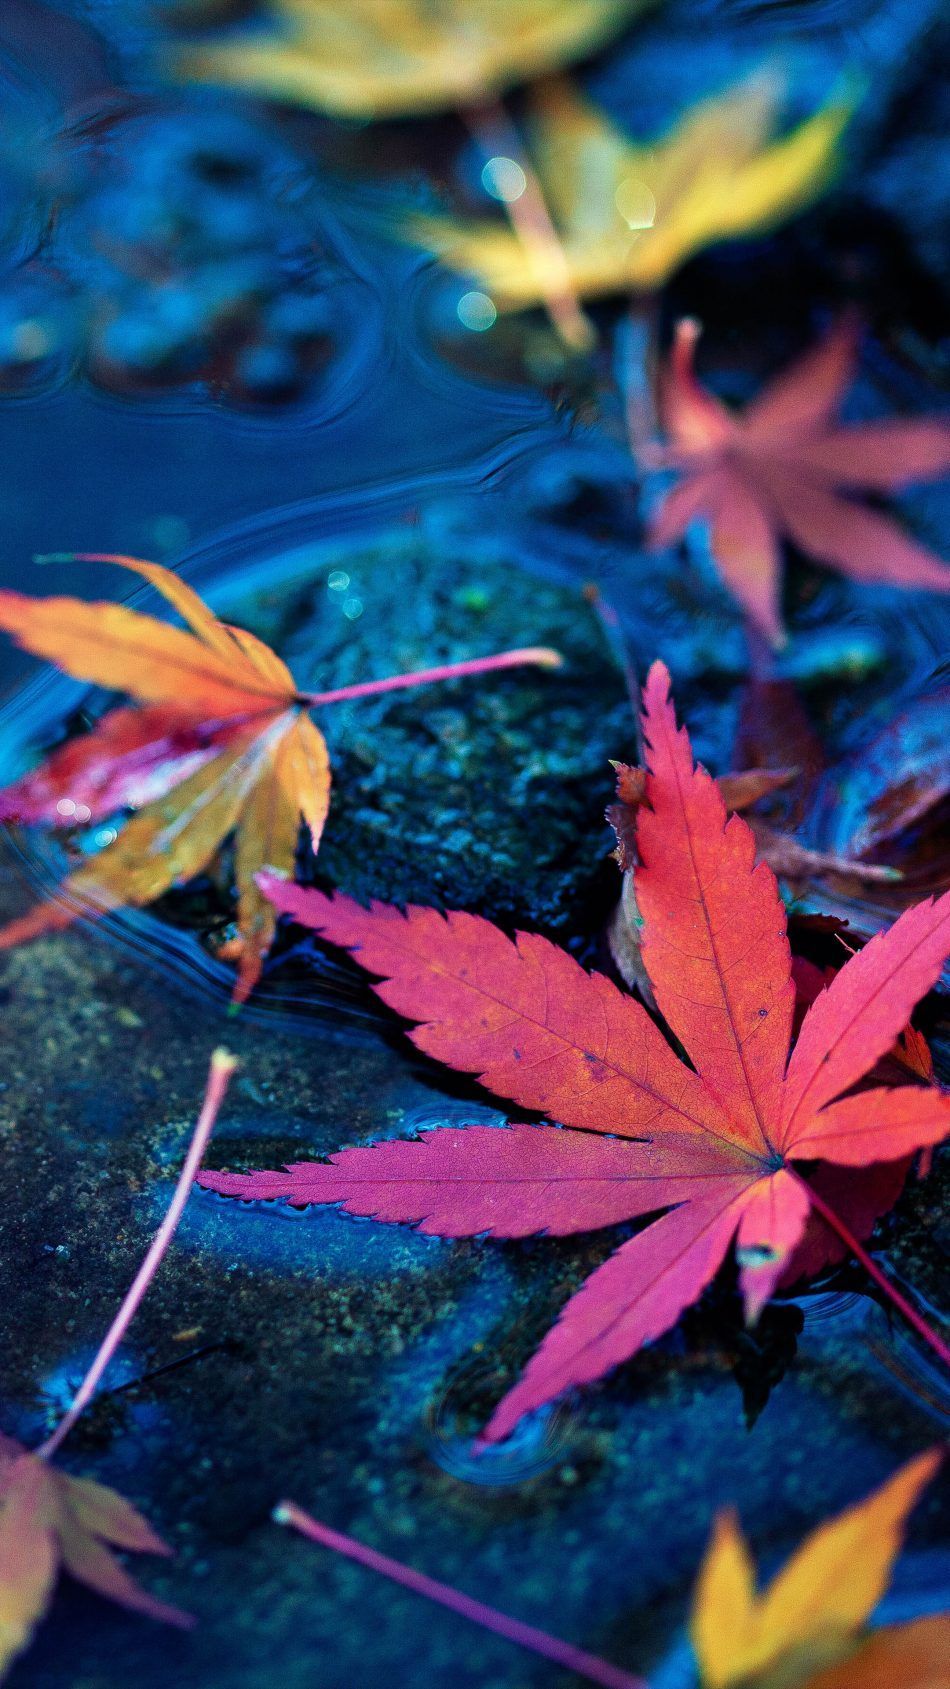 Red Maple Leaf Cell Phone Wallpaper Images Free Download on Lovepik   400338626